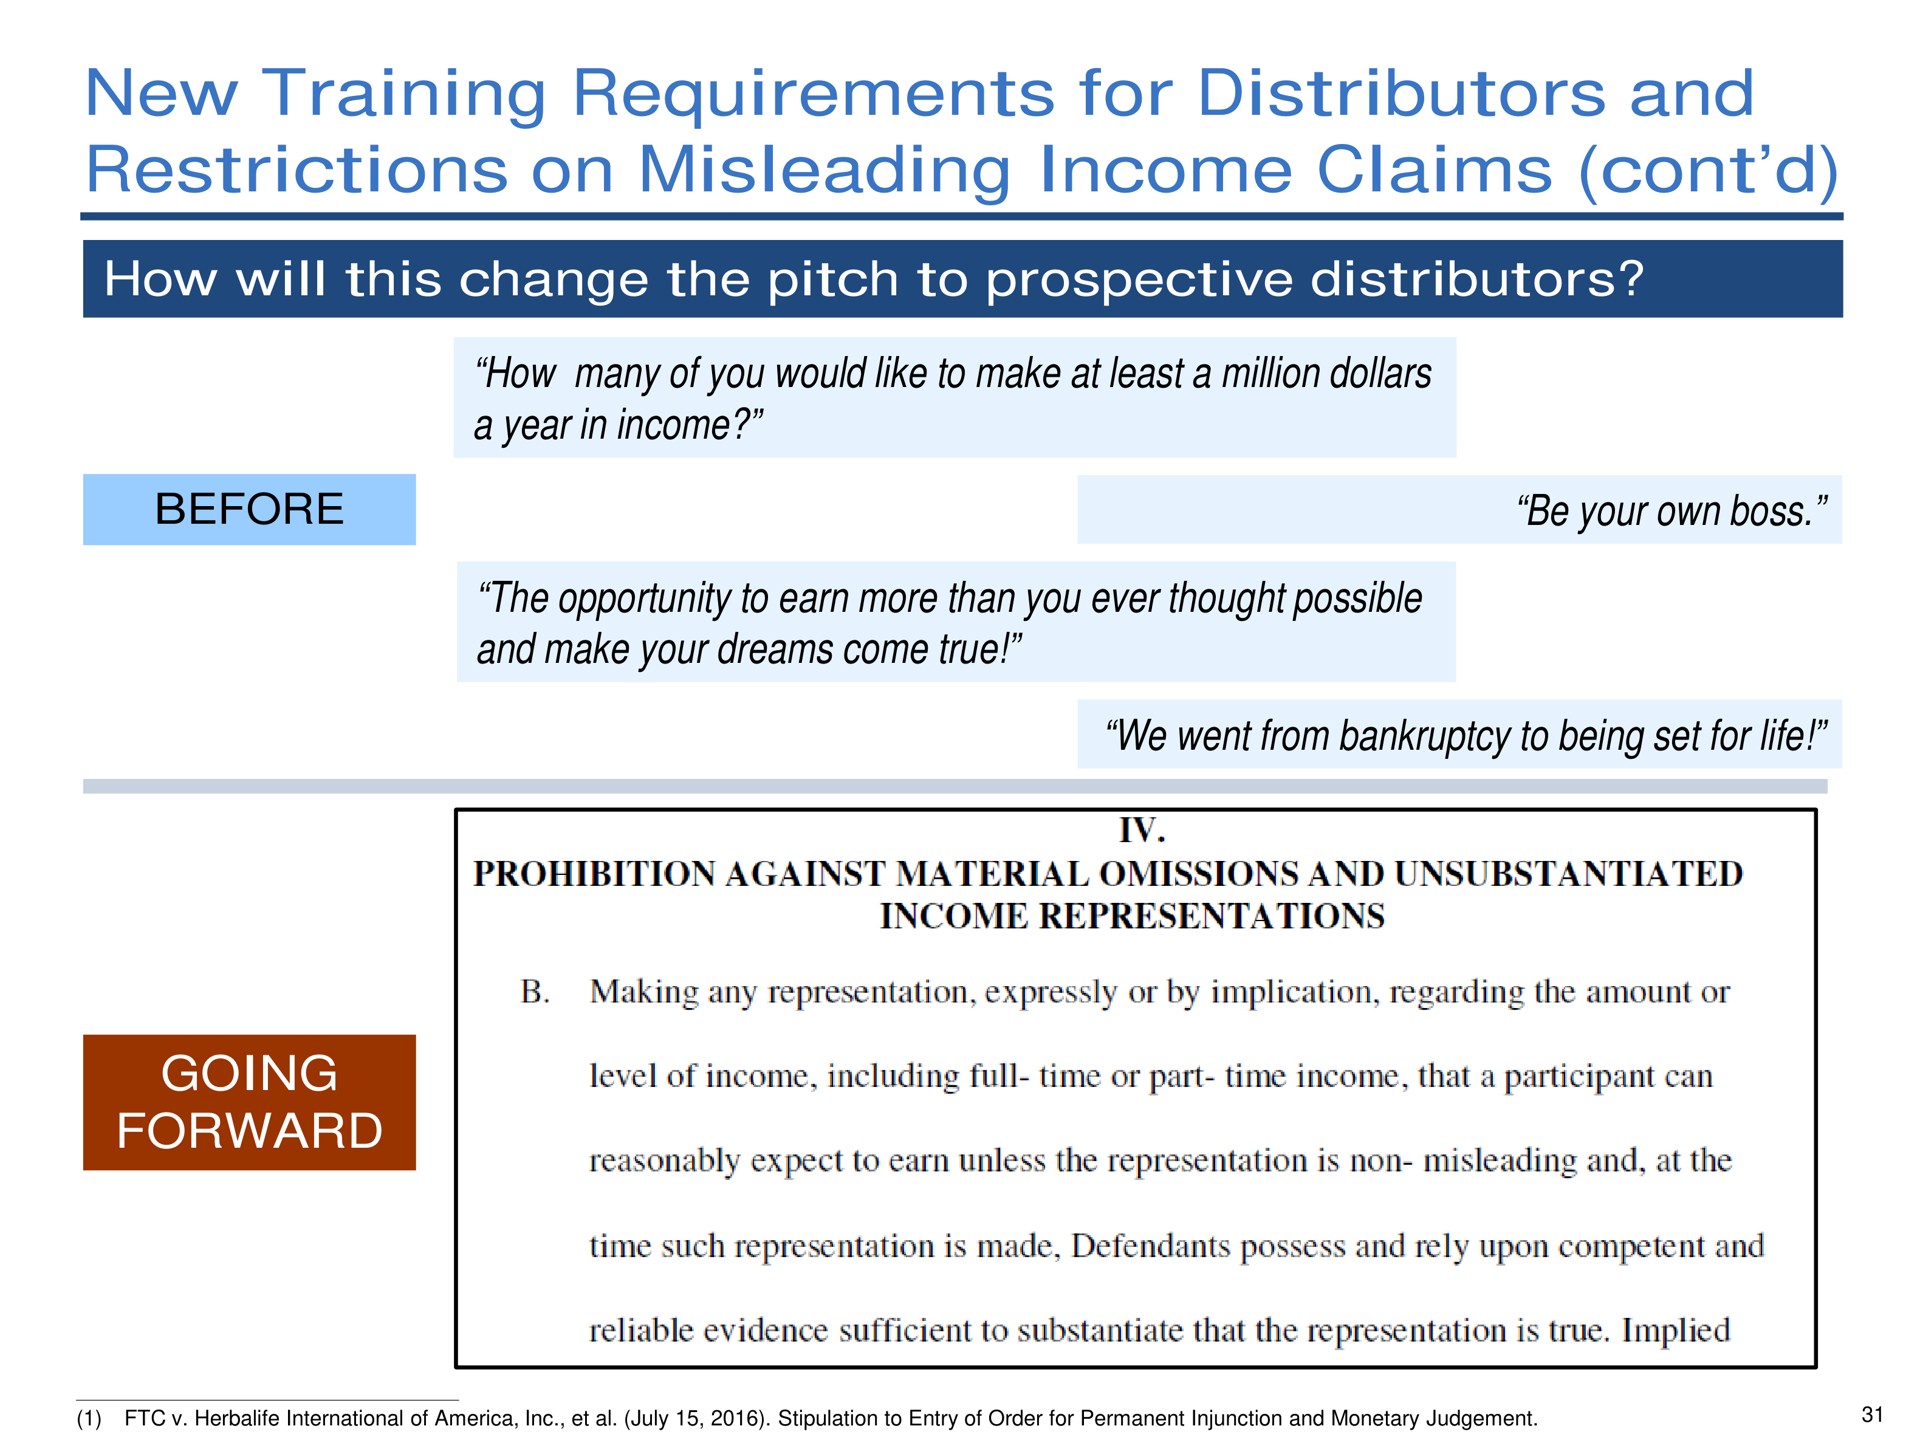 new training requirements for distributors and restrictions on misleading income claims | Pershing Square